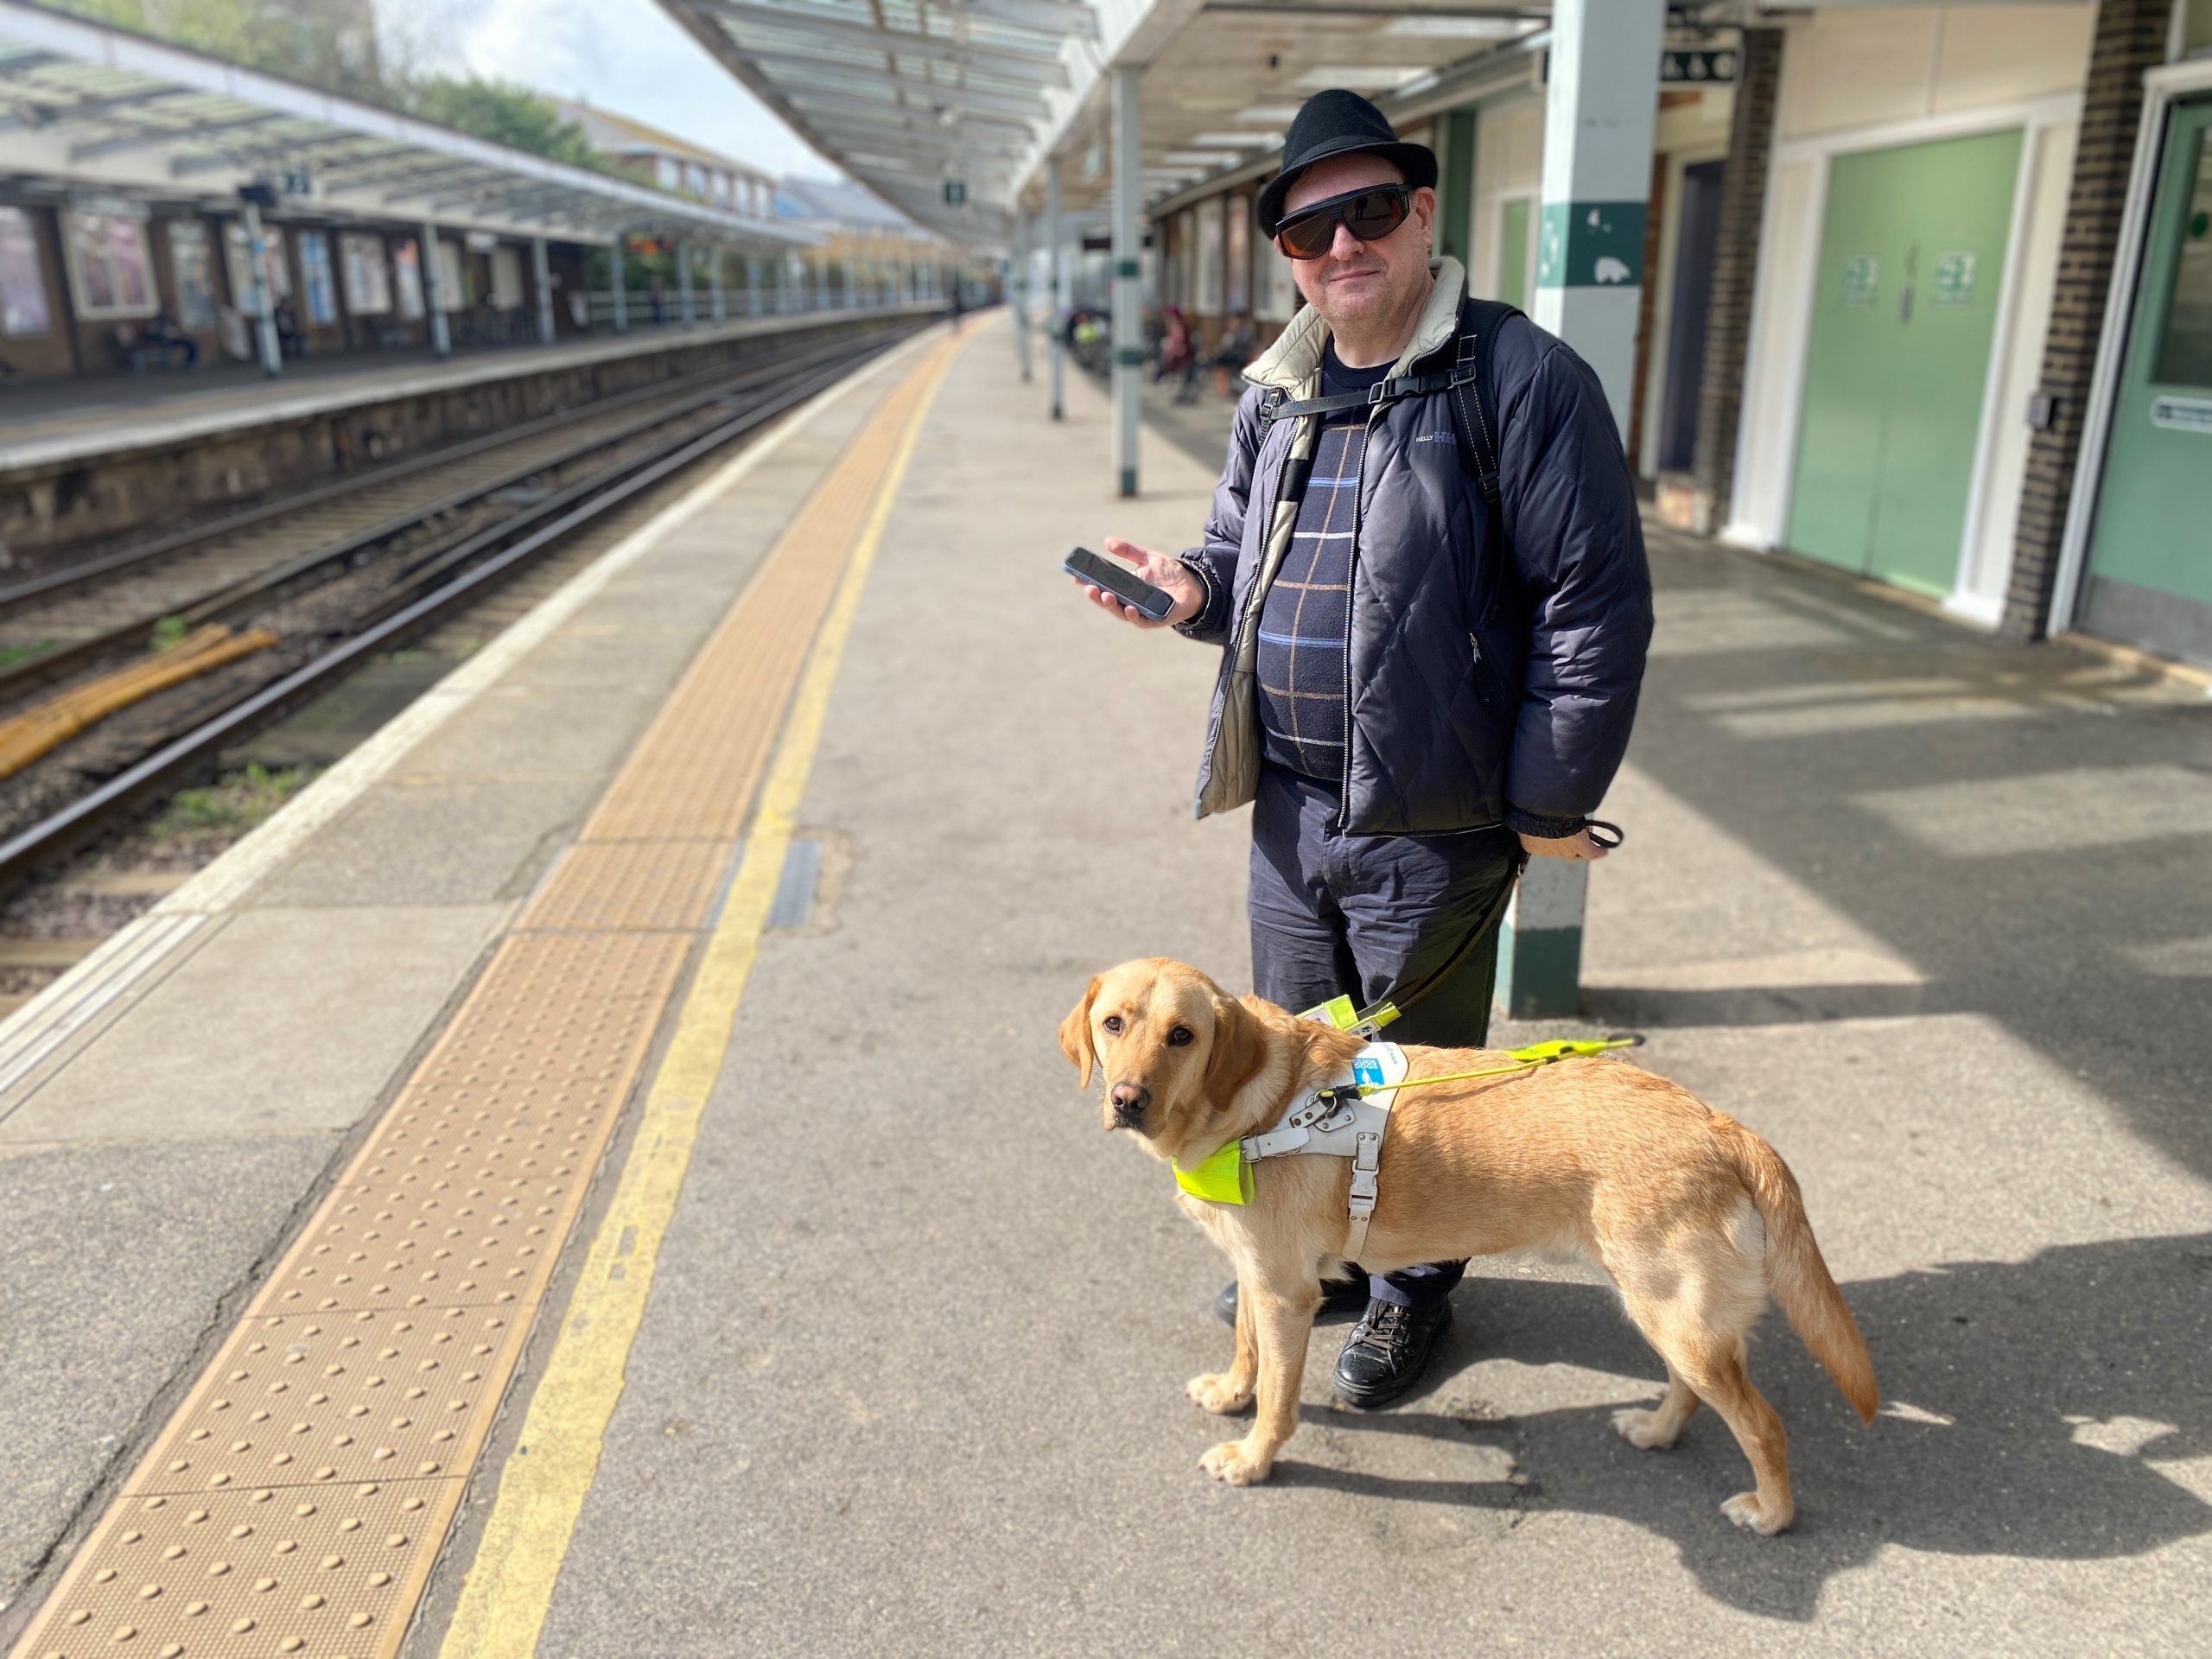 Paul Goddard and his Guide Dog Stevie, picture on a platform at Chichester Station. Paul is holding his smart phone in his hand, smiling at the camera.